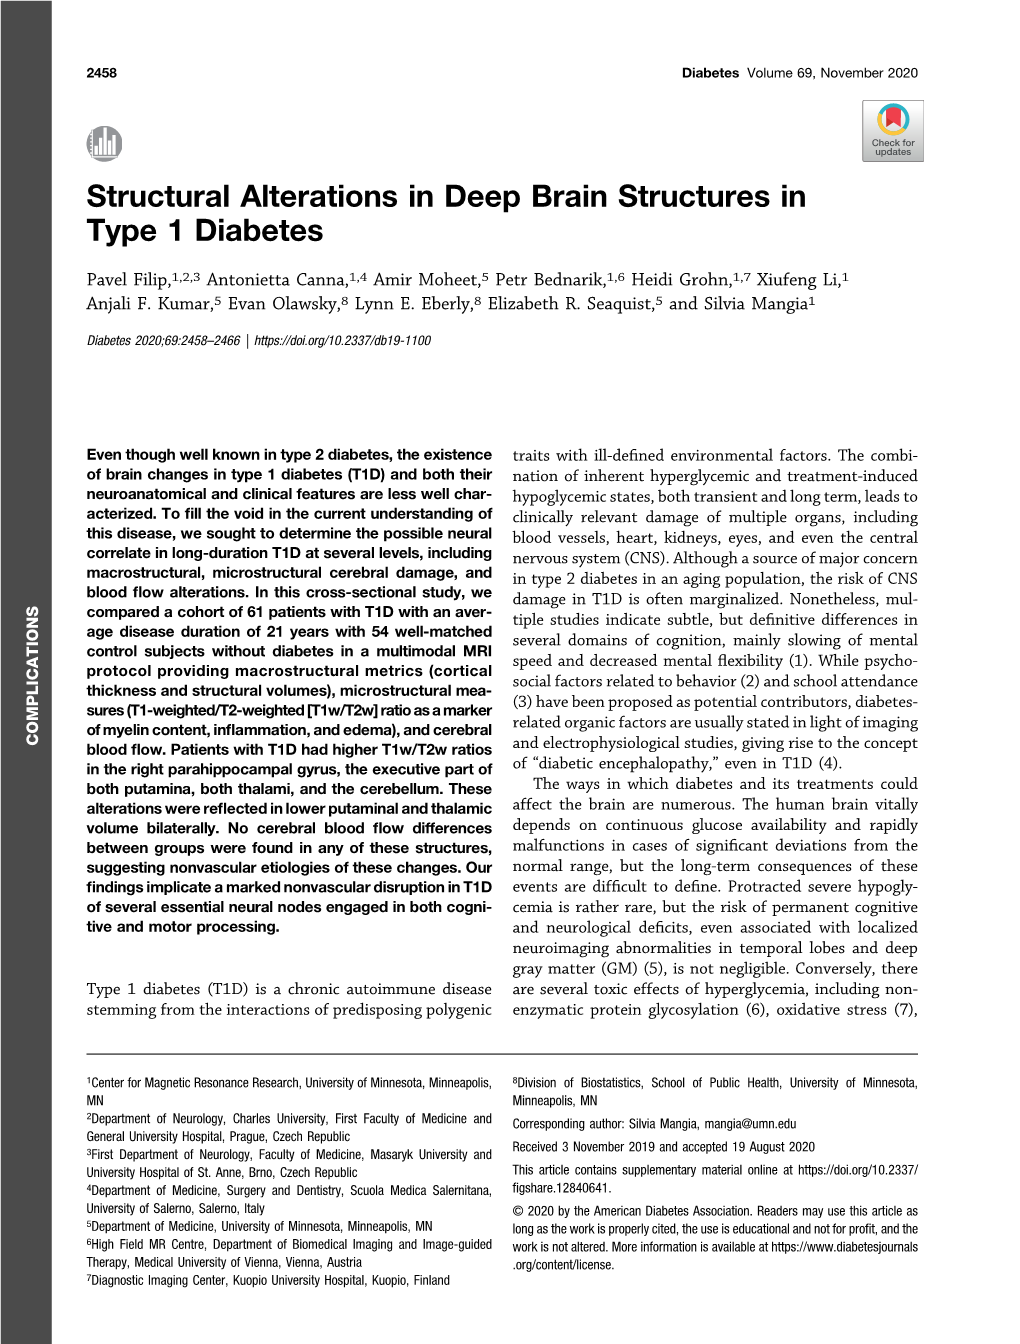 Structural Alterations in Deep Brain Structures in Type 1 Diabetes